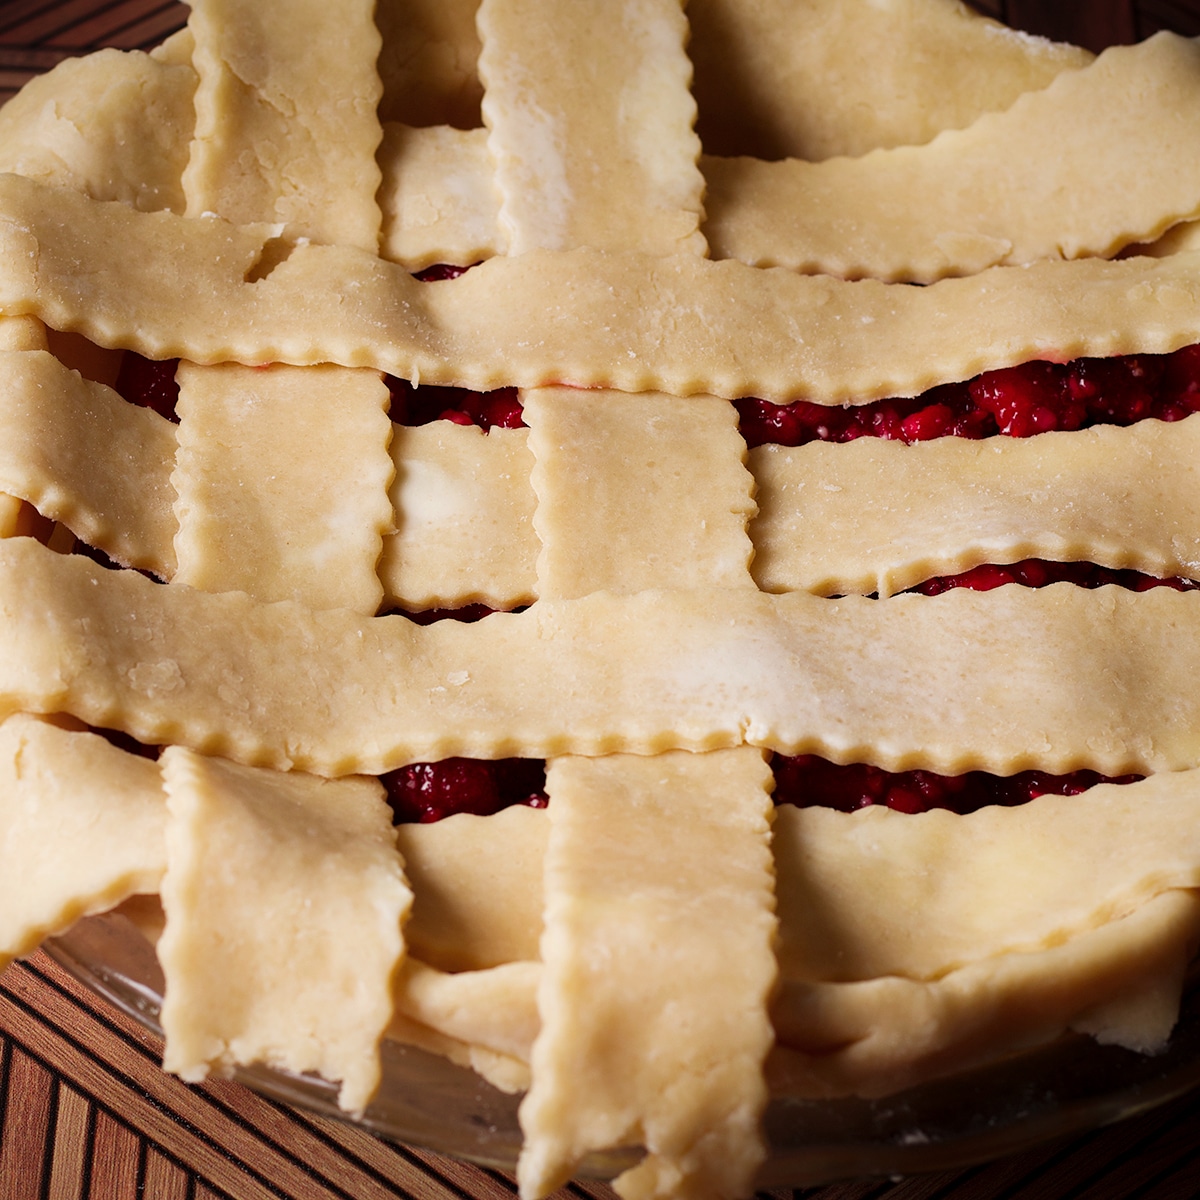 Weaving strips of pie dough over a pie to create a lattice pattern.